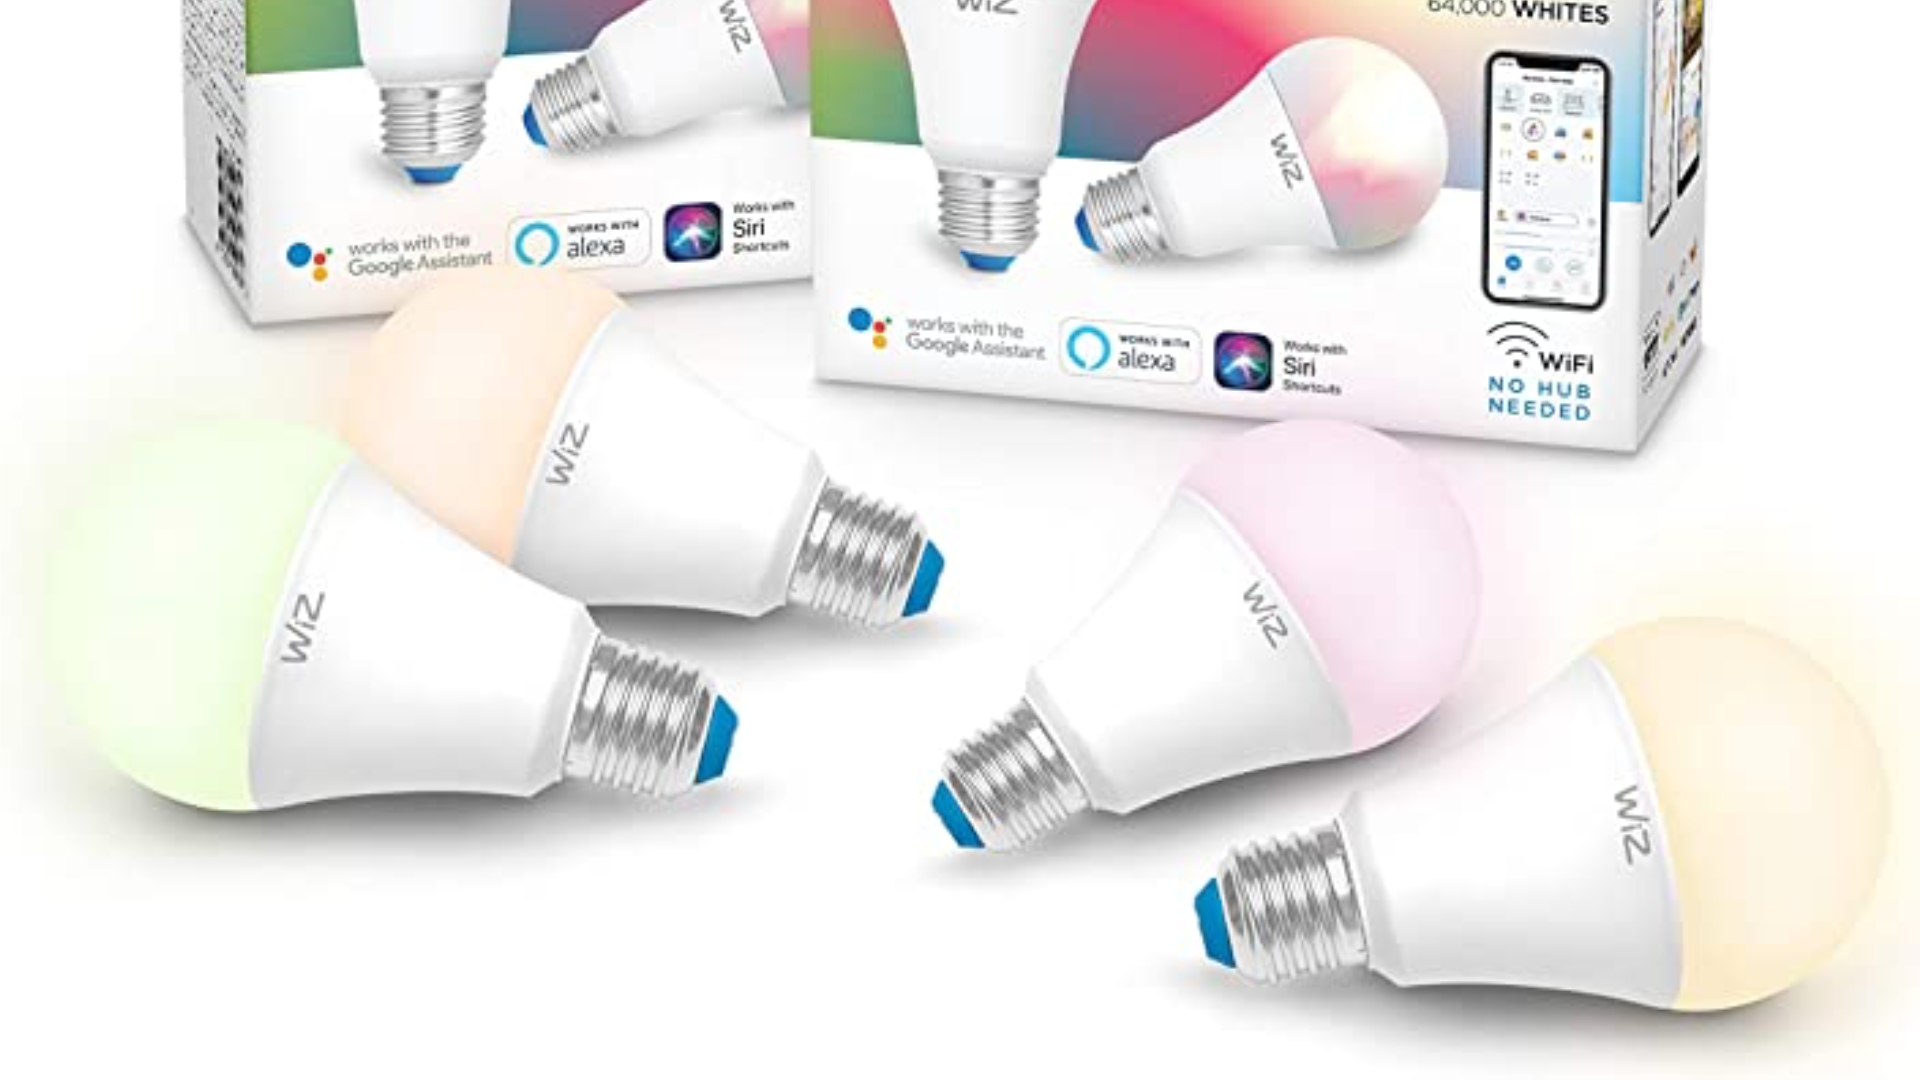 WiZ Smart Lights Now Compatible With Apple Home via Matter Update